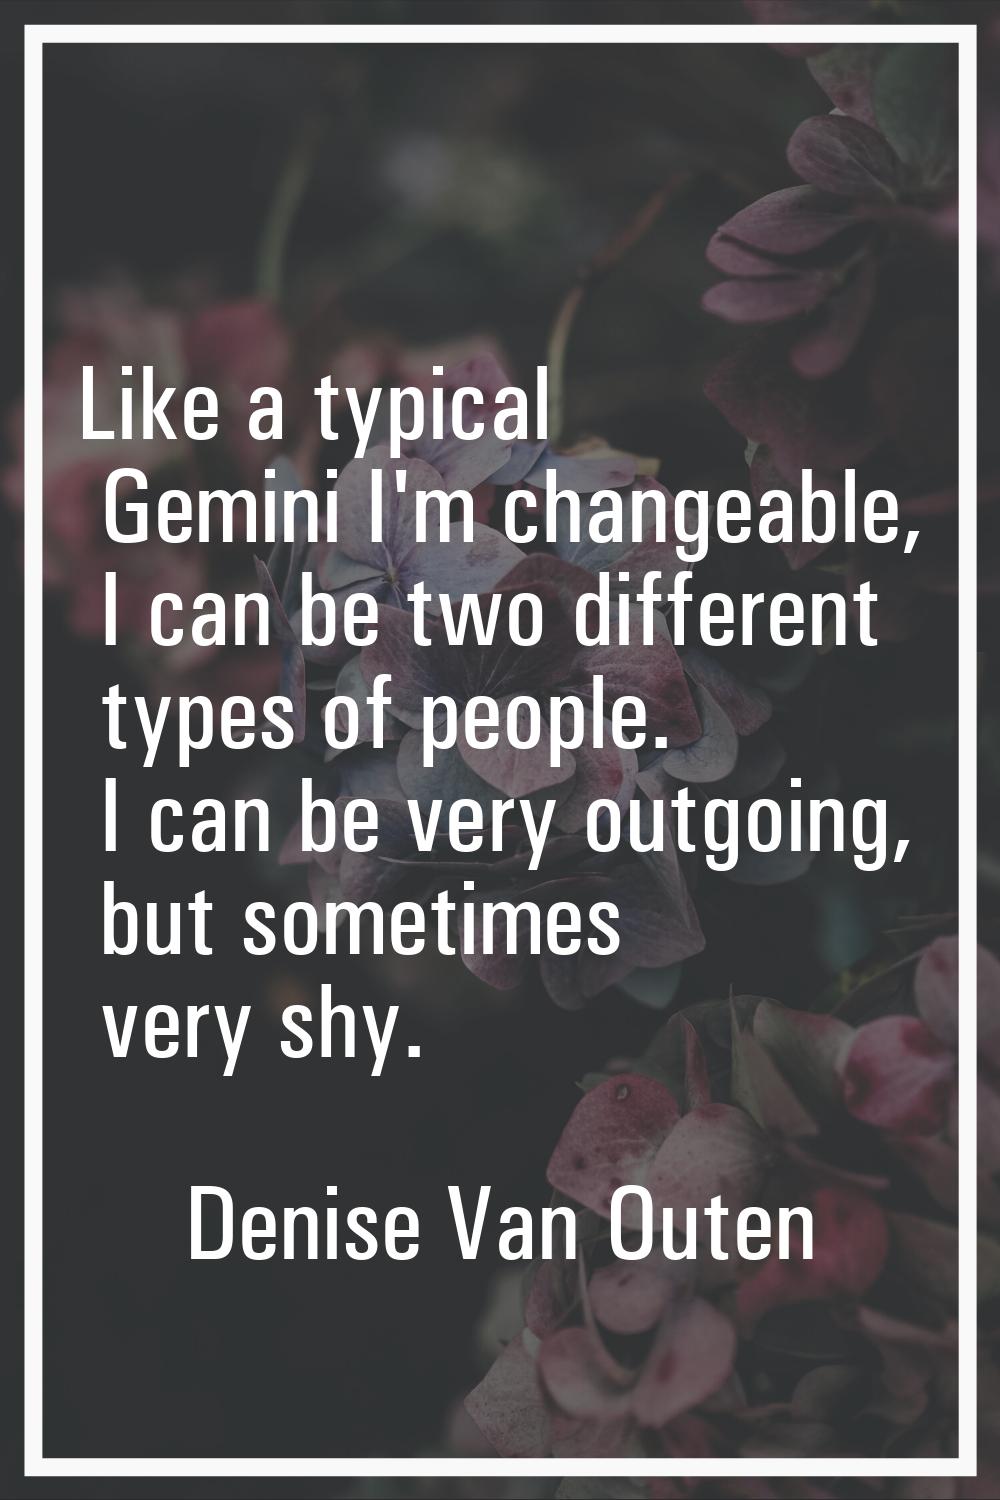 Like a typical Gemini I'm changeable, I can be two different types of people. I can be very outgoin